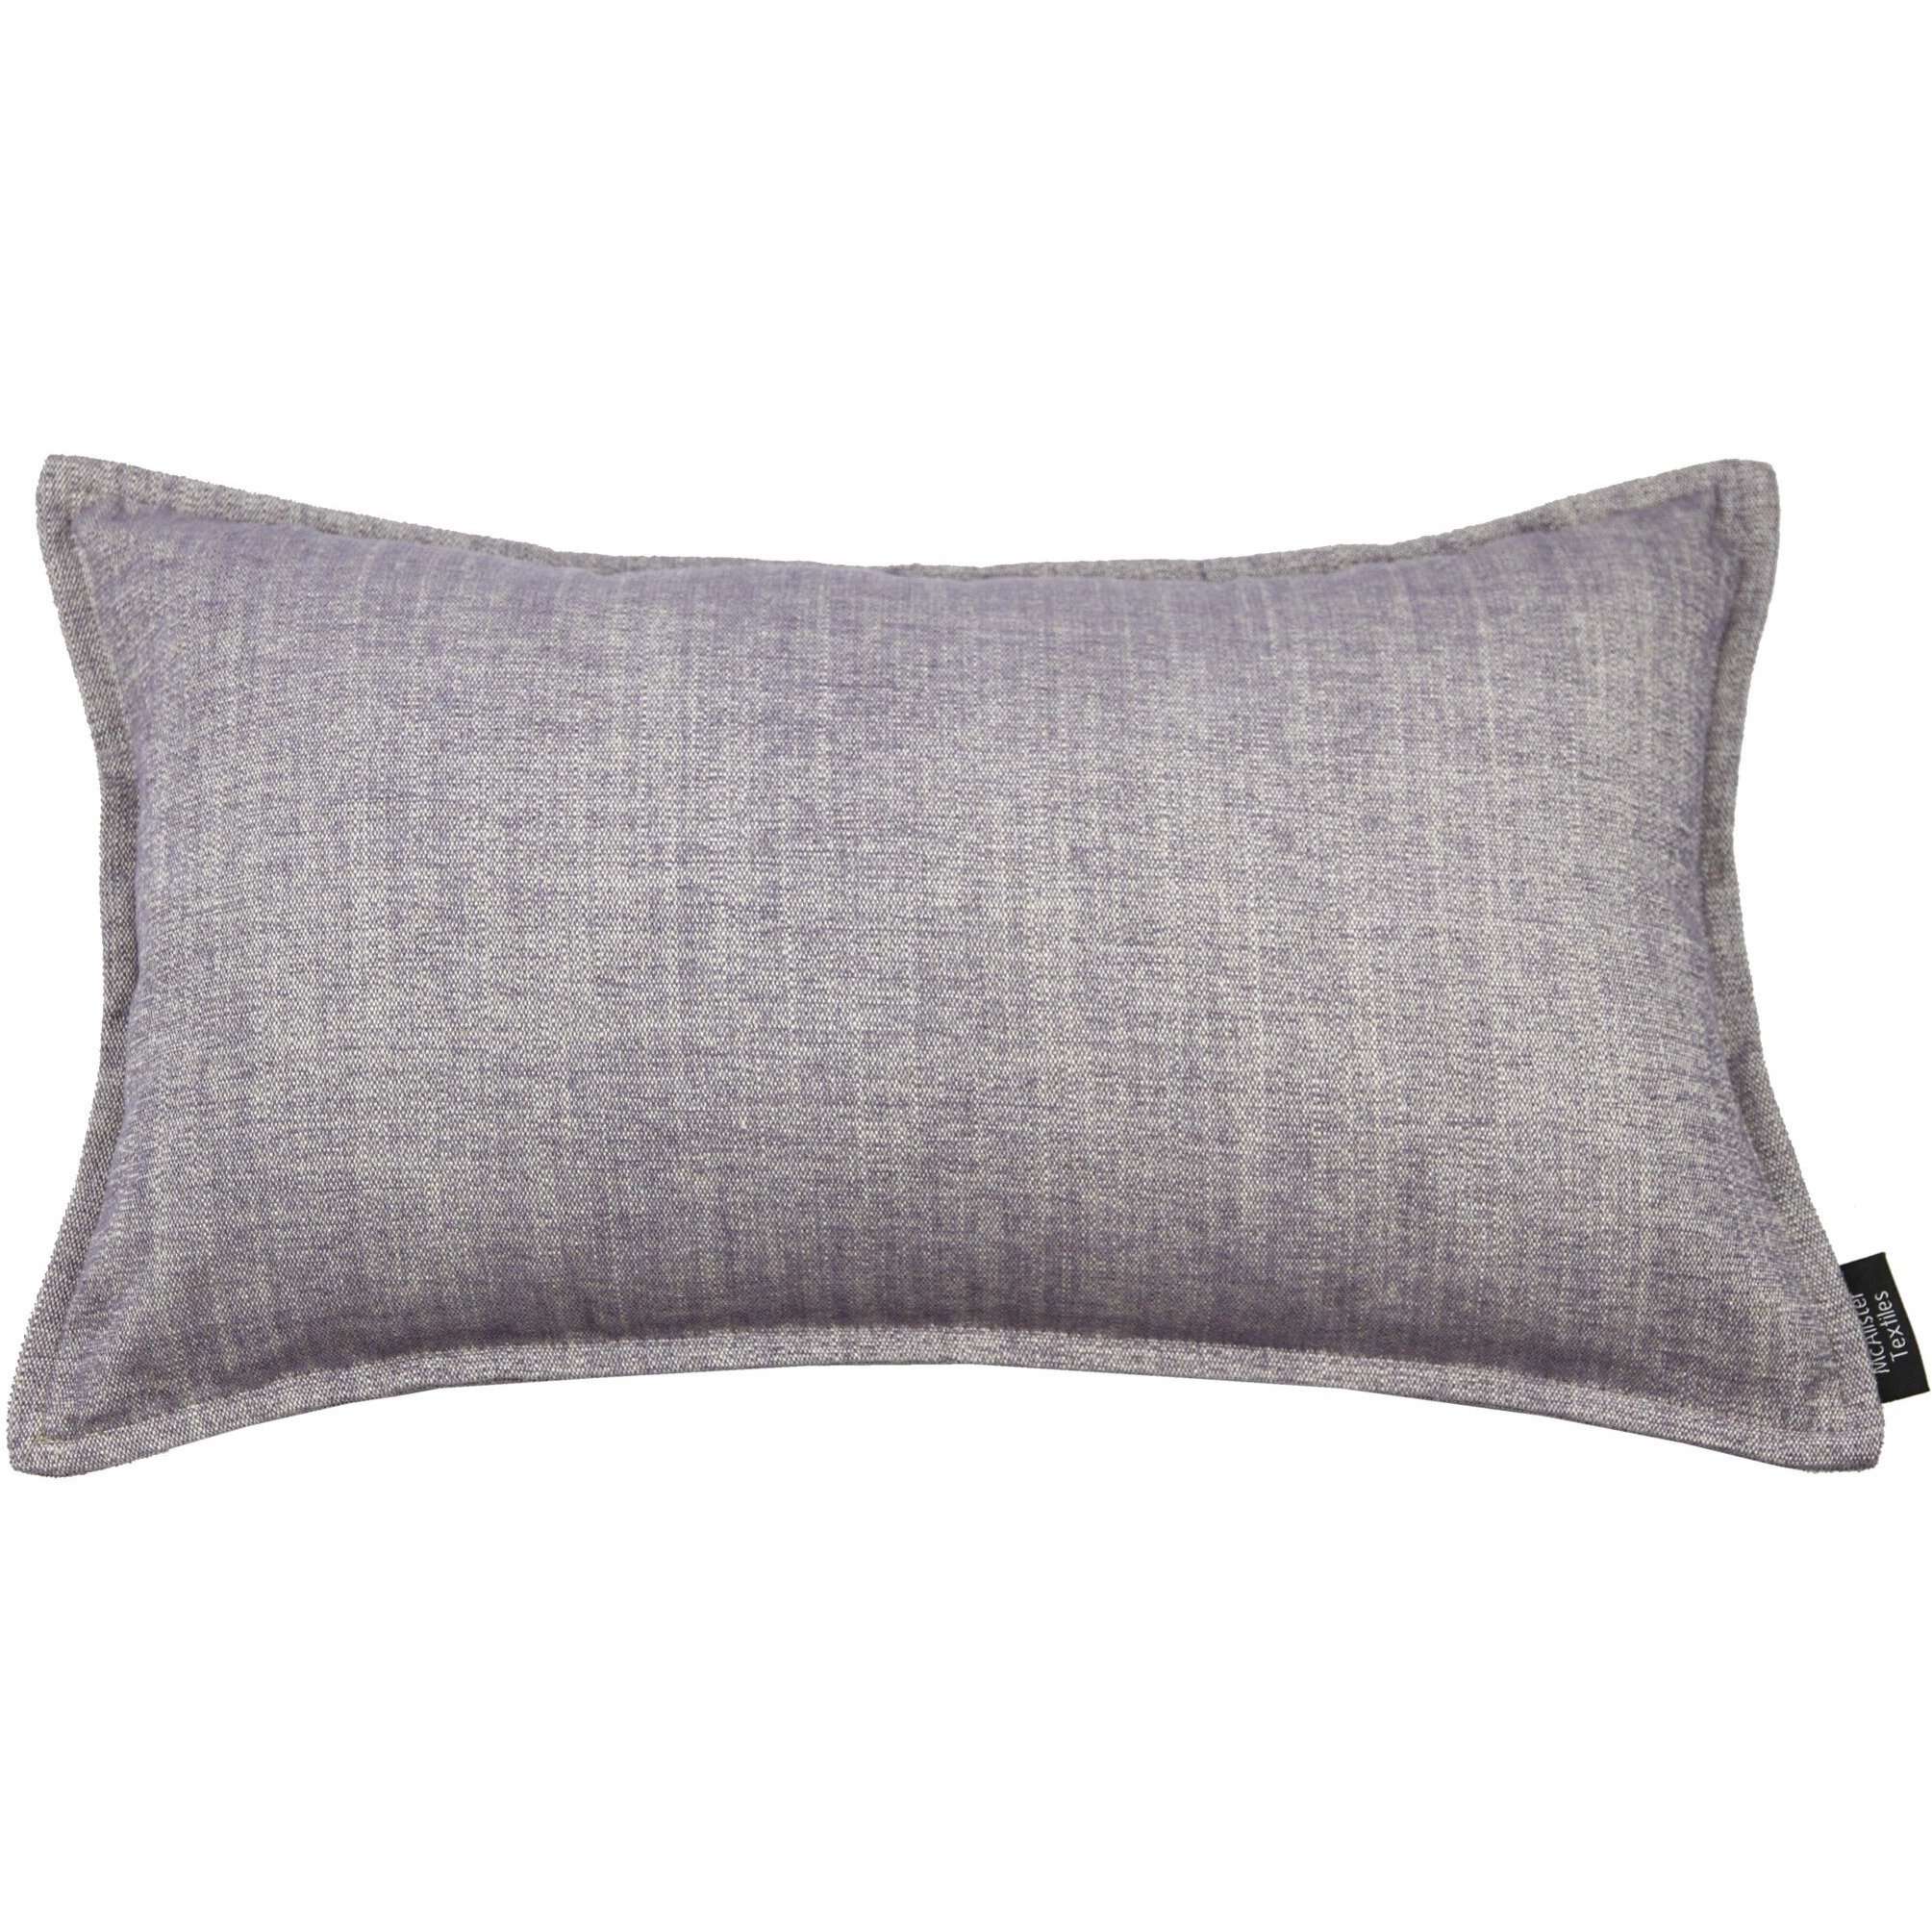 McAlister Textiles Rhumba Lilac Purple Pillow Pillow Cover Only 50cm x 30cm 